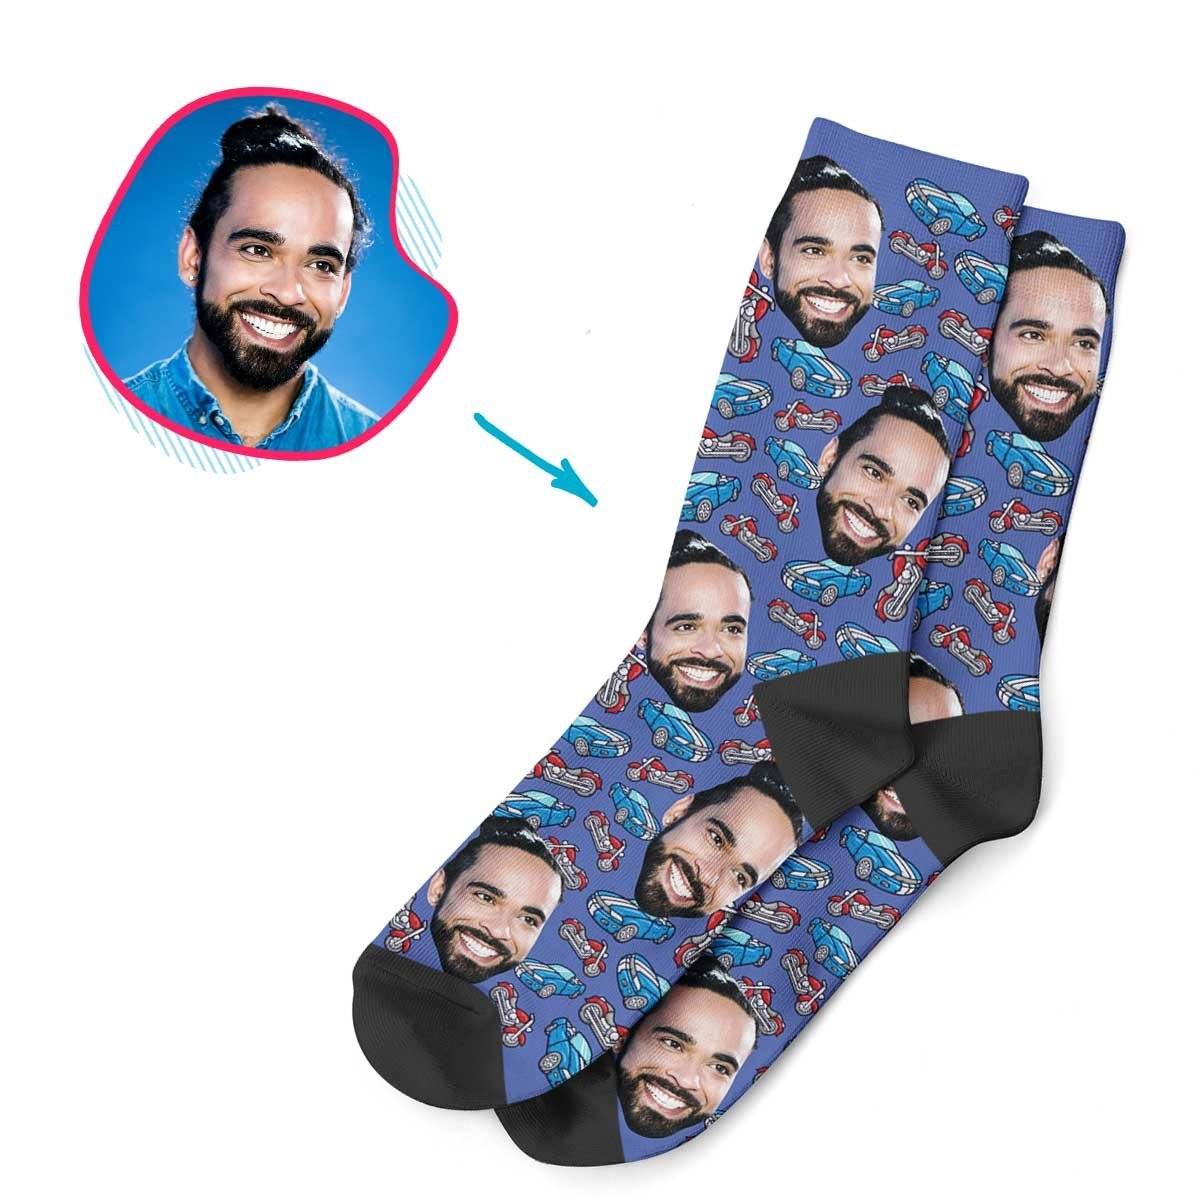 Darkblue Cars & Motorbikes personalized socks with photo of face printed on them